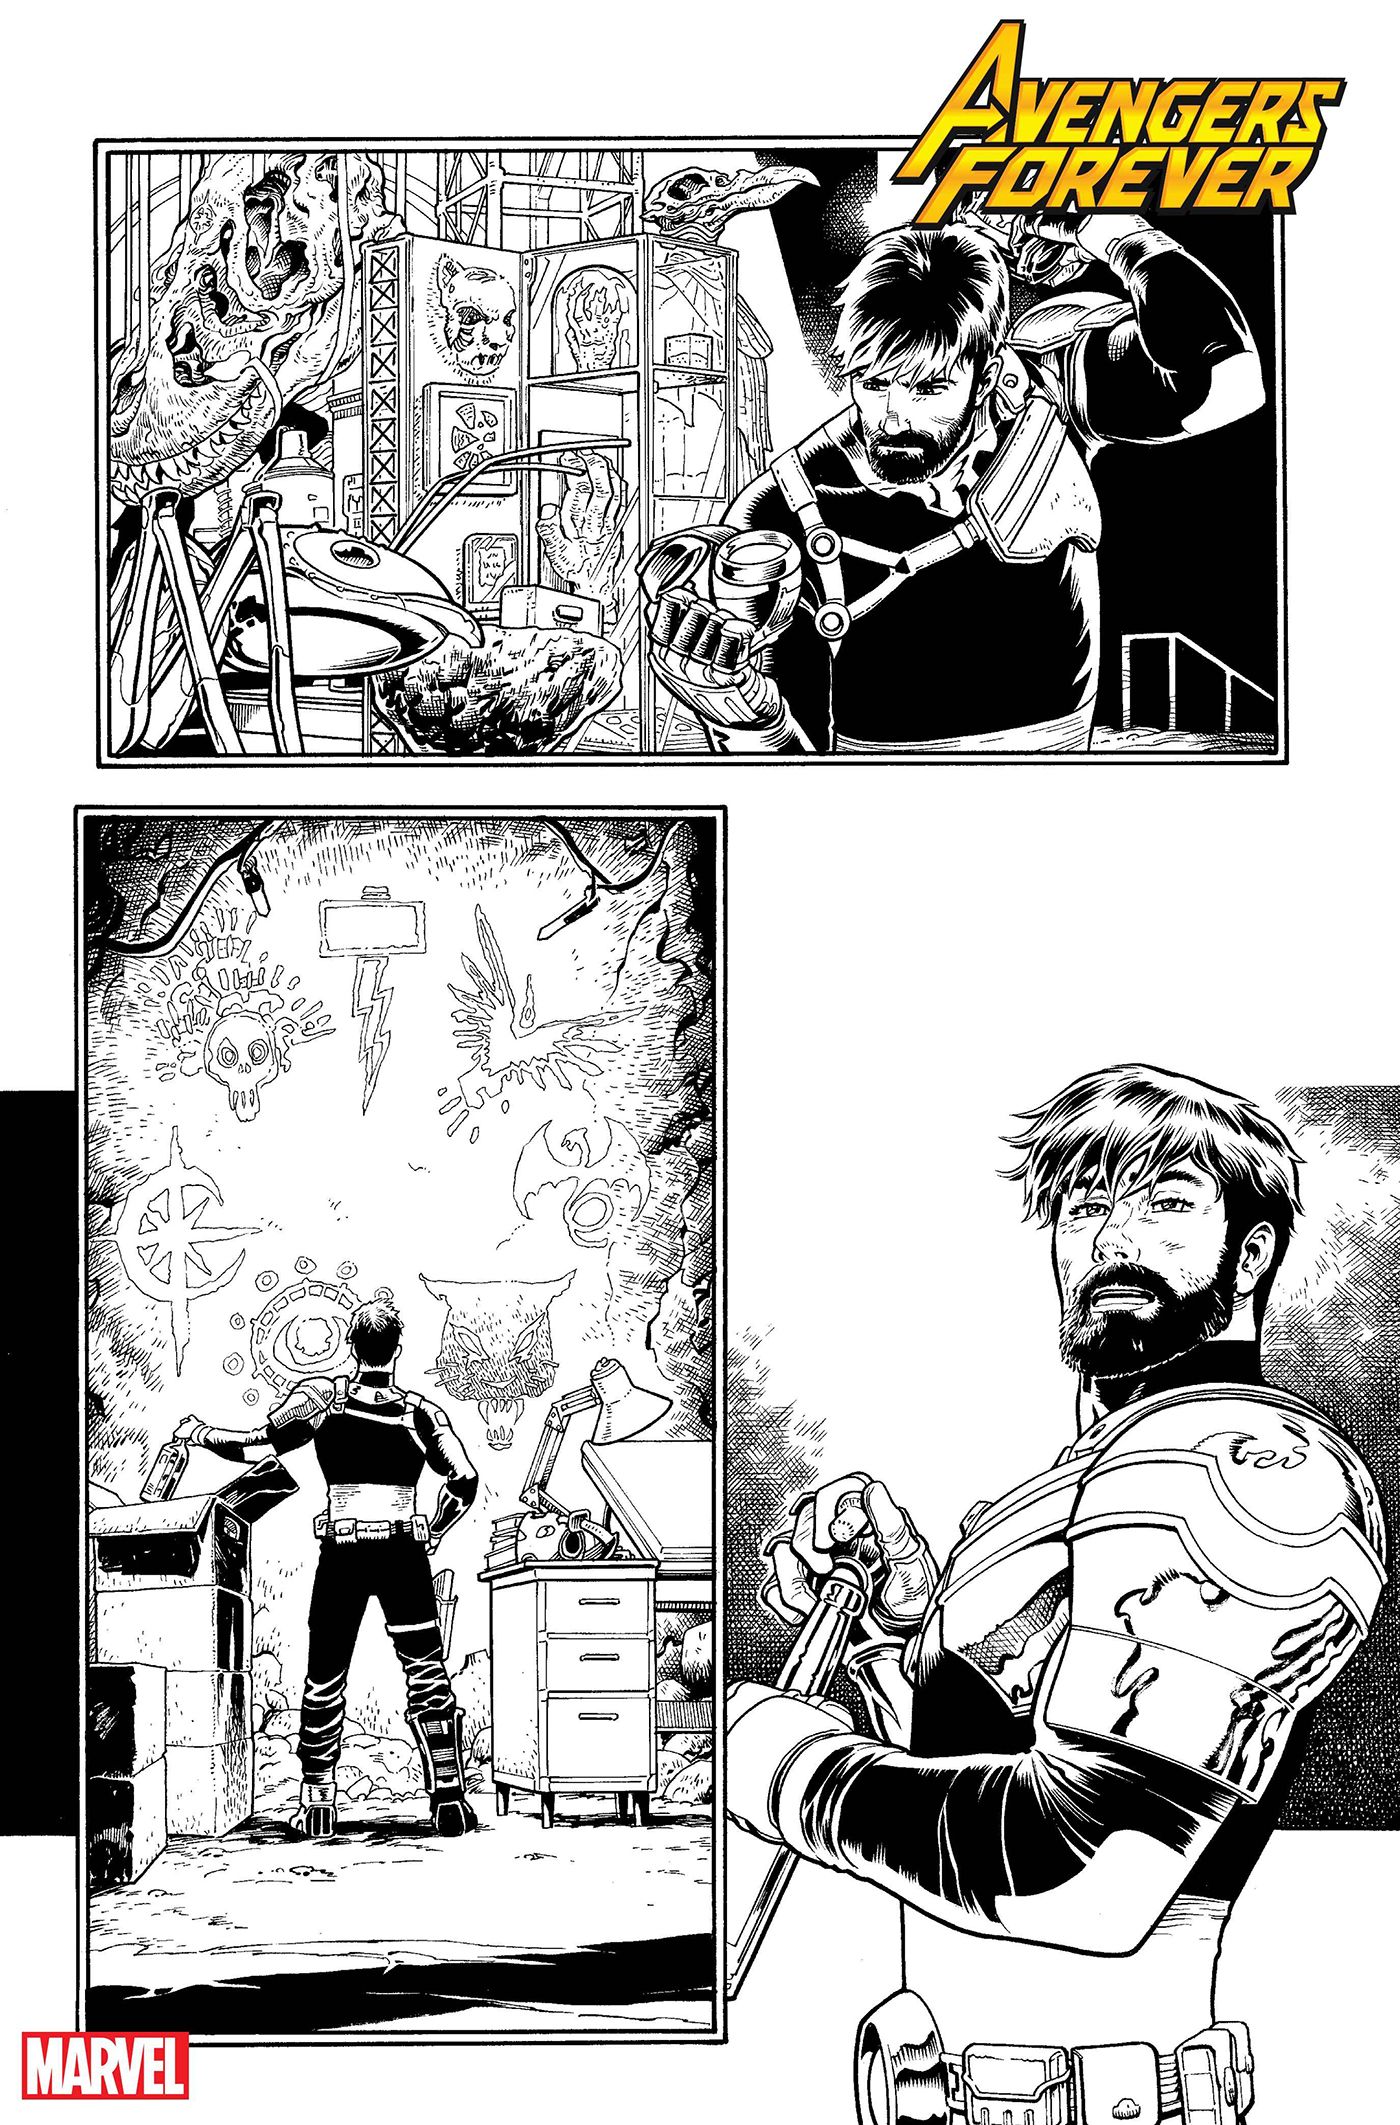 Black and white art show Tony Stark as the Invincible Ant-Man.